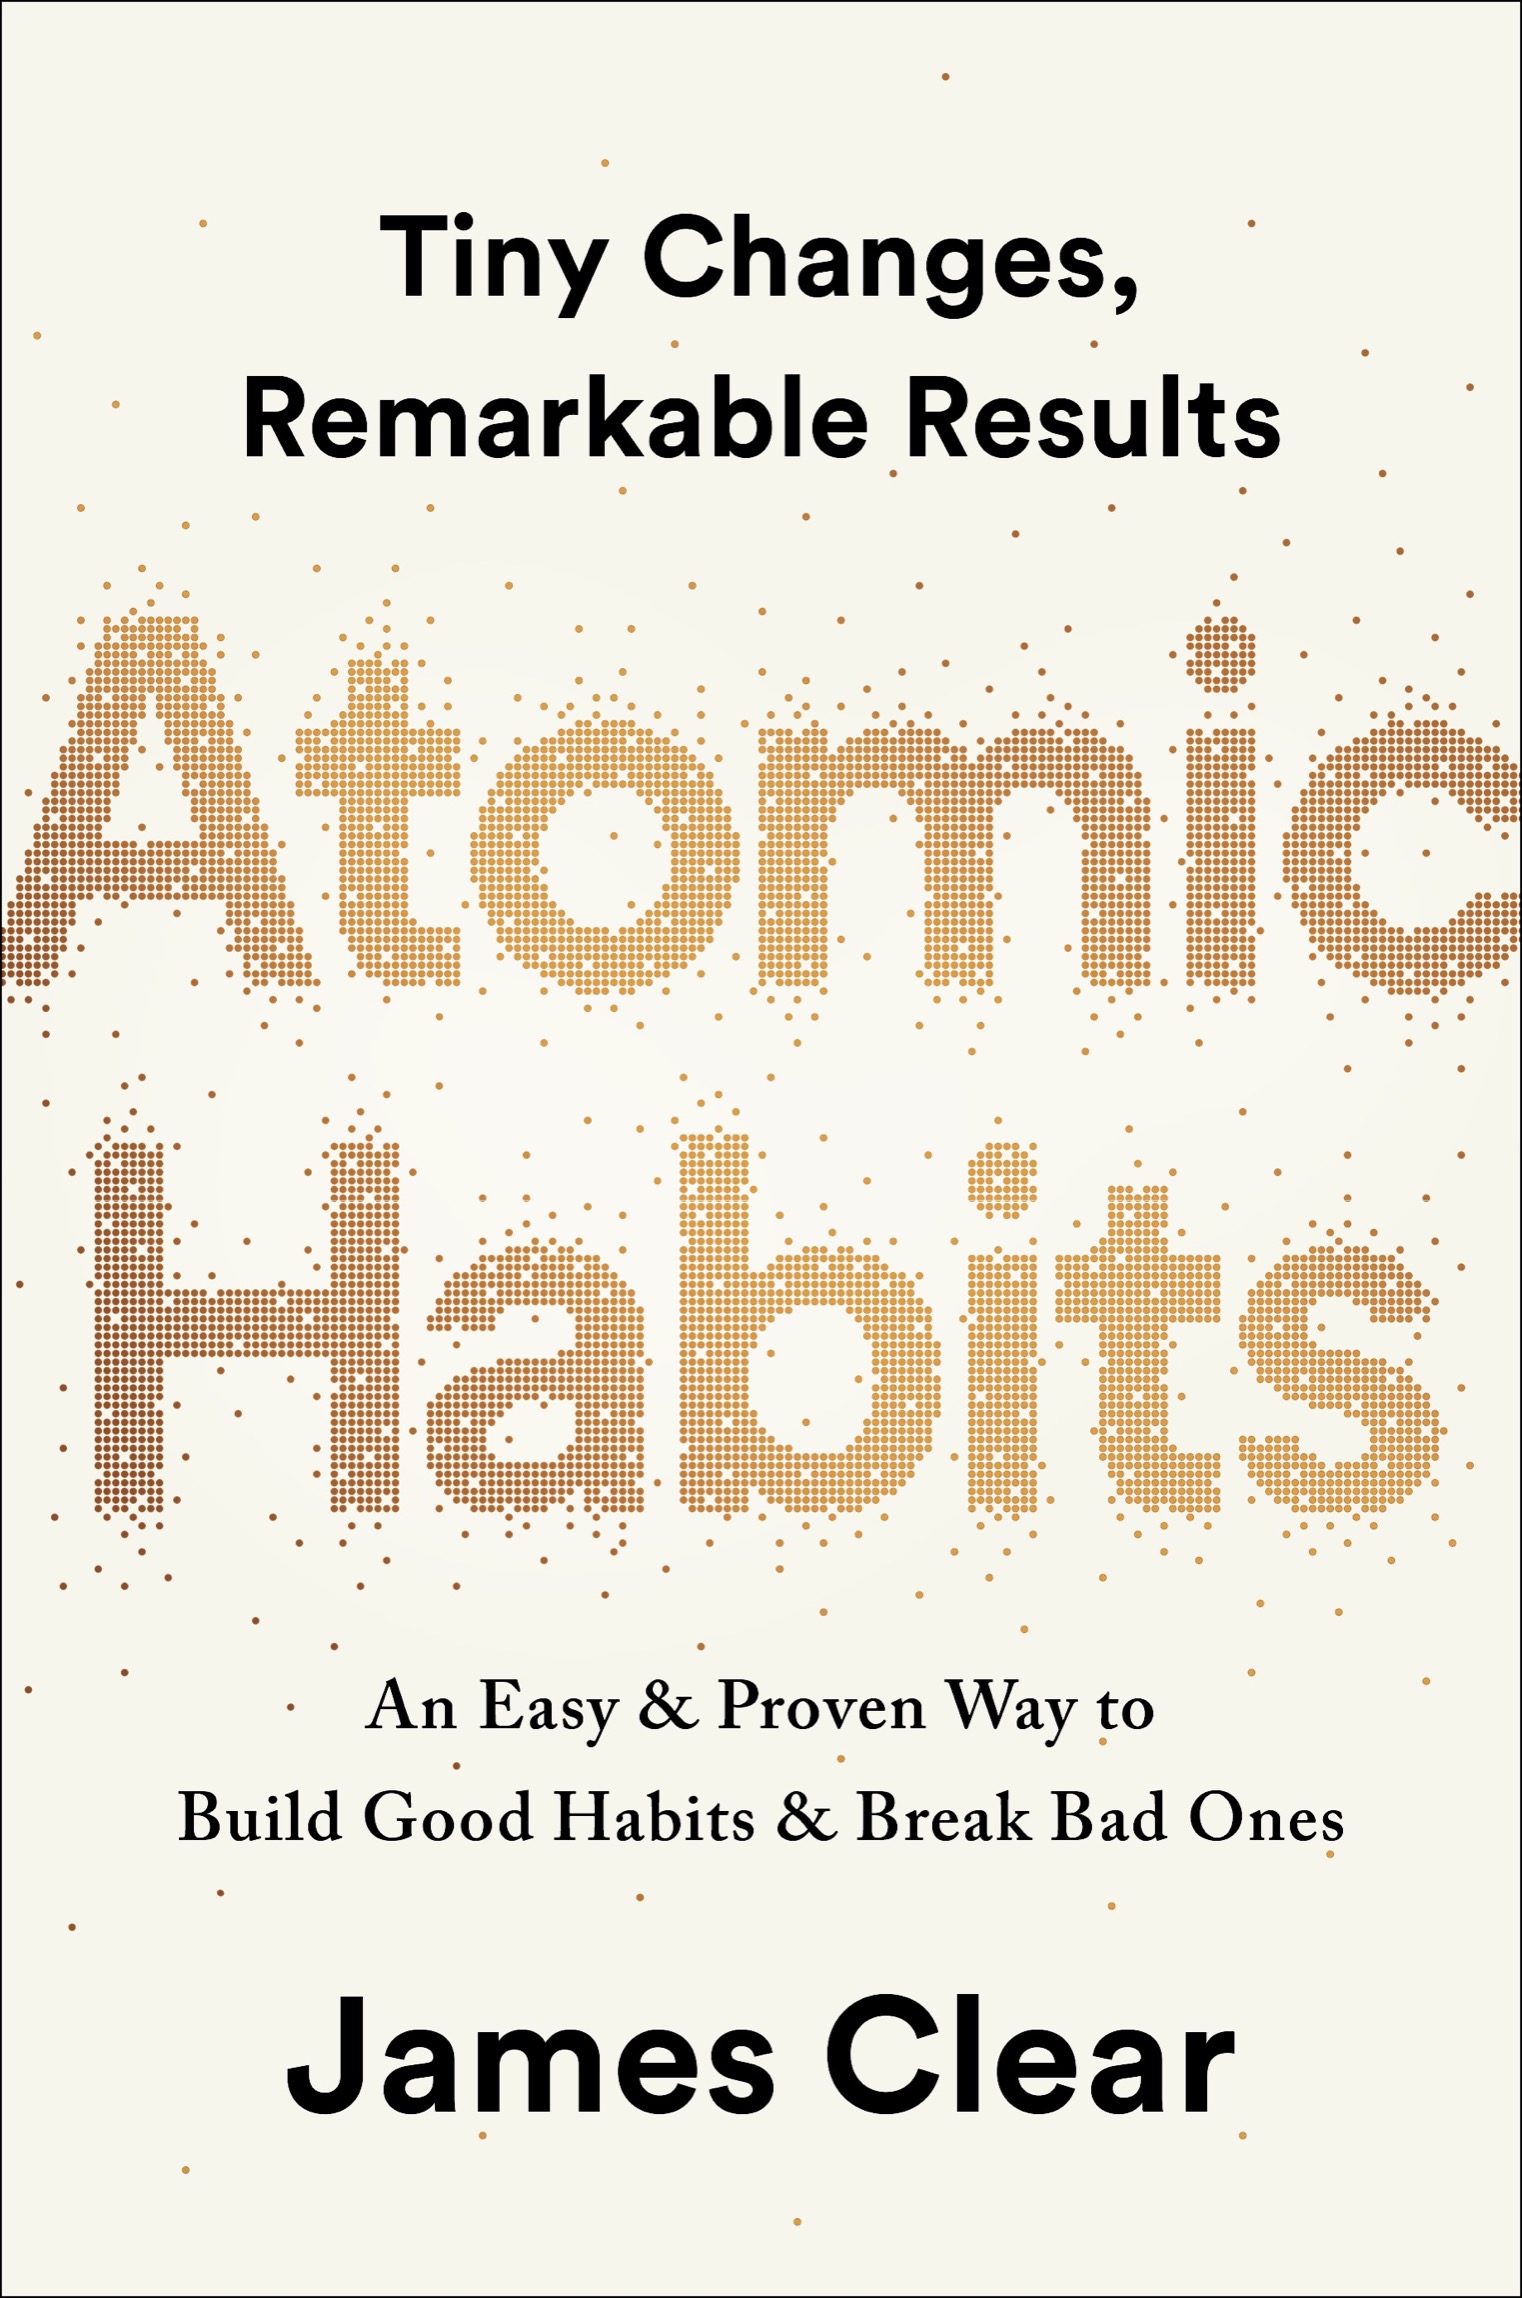 atomic habits tiny changes remarkable results james clear pdf